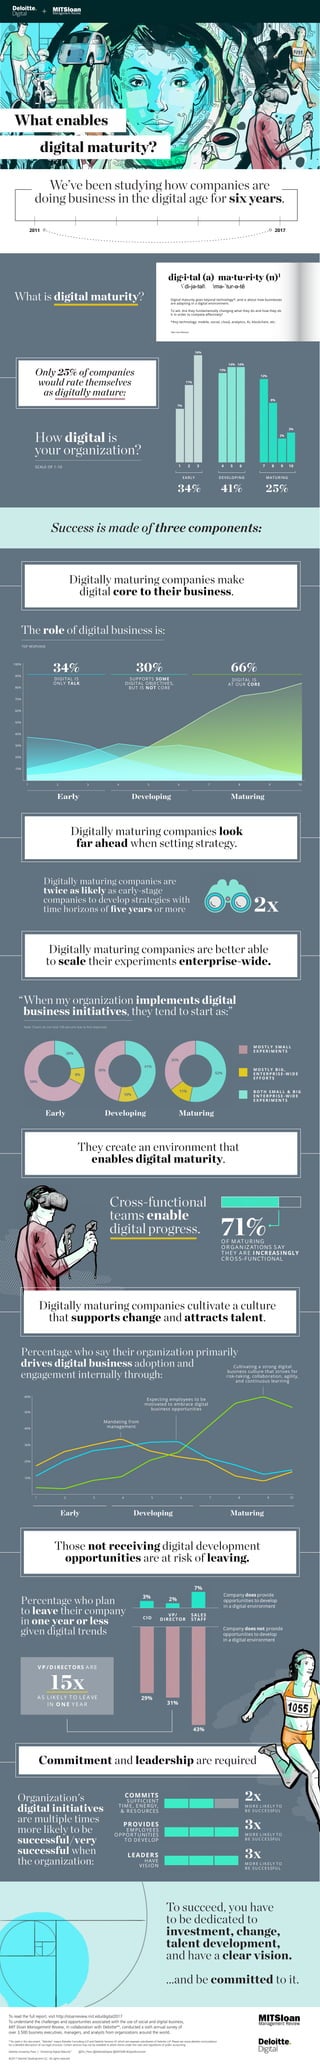 What enables
digital maturity?
“When my organization implements digital
business initiatives, they tend to start as:”
Only 25% of companies
would rate themselves
as digitally mature:
TOP RESPONSE
The role of digital business is:
Digitally maturing companies make
digital core to their business.
Digitally maturing companies look
far ahead when setting strategy.
Digitally maturing companies are better able
to scale their experiments enterprise-wide.
They create an environment that
enables digital maturity.
Digitally maturing companies cultivate a culture
that supports change and attracts talent.
Those not receiving digital development
opportunities are at risk of leaving.
Commitment and leadership are required
Early Developing Maturing
Note: Charts do not total 100 percent due to N/A responses
M O S T L Y S M A L L
E X P E R I M E N T S
M O S T L Y B I G ,
E N T E R P R I S E - W I D E
E F F O R T S
B O T H S M A L L & B I G
E N T E R P R I S E - W I D E
E X P E R I M E N T S
M O S T L Y S M A L L
E X P E R I M E N T S
M O S T L Y B I G ,
E N T E R P R I S E - W I D E
E F F O R T S
B O T H S M A L L & B I G
E N T E R P R I S E - W I D E
E X P E R I M E N T S
EARLY DEVELOPING MATURING
1 2 3 4 5 6 7 8 9 10
7%
11%
16%
13%
14% 14%
12%
8%
2%
3%
34% 41% 25%
58%
8%
20%
45%
10%
11%
41%
35%
52%
10%
1 2 3 4 5 6 7 8 9 10
60%
50%
40%
30%
20%
Early Developing Maturing
CIO
VP/
DIRECTOR
SALES
STAFF
43%
29%
31%
3% 2%
7%
SALES
7%
VP/
2%3%
DIRECTOR STAFF
29%
31%
34% 30% 66%100%
90%
70%
80%
60%
40%
50%
30%
10%
20%
DIGITAL IS
ONLY TALK
SUPPORTS SOME
DIGITAL OBJECTIVES,
BUT IS NOT CORE
DIGITAL IS
AT OUR CORE
Early Developing Maturing
1 2 3 4 5 6 7 8 9 10
We’ve been studying how companies are
doing business in the digital age for six years.
What is digital maturity?
2011 2017
dig·i·tal (a) ma·tu·ri·ty (n)1
ˈdi-jə-təl mə-ˈtur-ə-tē
1
Merriam-Webster
Digital maturity goes beyond technology*, and is about how businesses
are adapting in a digital environment.
To wit: Are they fundamentally changing what they do and how they do
it in order to compete eﬀectively?
*Any technology: mobile, social, cloud, analytics, AI, blockchain, etc.
SCALE OF 1-10
How digital is
your organization?
leadership are required
43%
Success is made of three components:
Digitally maturing companies are
twice as likely as early-stage
companies to develop strategies with
time horizons of ﬁve years or more
3xM O R E L I K E LY T O
B E S U C C E S SFU L
LEADERS
HAVE
VIS ION
S
E
N
3x
M O R E L I K E LY T O
B E S U C C E S SFU L
PROVIDES
E M PLOYE ES
OPPOR T UNITIES
T O DE VE LOP
S
S
S
P
2x
M O R E L I K E LY T O
B E S U C C E S SFU L
COMMITS
S UFFIC IENT
T IM E , E NE RGY,
& R E S OURCES
S
T
,
S
Cross-functional
teams enable
digital progress.
OF M AT UR ING
OR GA N IZATIONS S AY
T HE Y A R E I NCREAS INGLY
C R OS S-FUNCTIONAL
71%
Organization's
digital initiatives
are multiple times
more likely to be
successful/very
successful when
the organization:
Percentage who say their organization primarily
drives digital business adoption and
engagement internally through:
Percentage who plan
to leave their company
in one year or less
given digital trends
2x
Mandating from
management
Expecting employees to be
motivated to embrace digital
business opportunities
Cultivating a strong digital
business culture that strives for
risk-taking, collaboration, agility,
and continuous learning
Company does provide
opportunities to develop
in a digital environment
Company does not provide
opportunities to develop
in a digital environment
V P / D I RECT ORS A RE
15xA S LIKE LY T O LE A VE
IN O N E Y E A R
To succeed, you have
to be dedicated to
investment, change,
talent development,
and have a clear vision.
...and be committed to it.
2
To read the full report, visit http://sloanreview.mit.edu/digital2017
To understand the challenges and opportunities associated with the use of social and digital business, 
MIT Sloan Management Review, in collaboration with Deloitte**, conducted a sixth annual survey of
over 3,500 business executives, managers, and analysts from organizations around the world.
**As used in this document, “Deloitte” means Deloitte Consulting LLP and Deloitte Services LP, which are separate subsidiaries of Deloitte LLP. Please see www.deloitte.com/us/about
for a detailed description of our legal structure. Certain services may not be available to attest clients under the rules and regulations of public accounting.
Deloitte University Press | “Achieving Digital Maturity” @DU_Press @DeloitteDigital @MITSMR #DigitalEvolution
©2017 Deloitte Development LLC. All rights reserved.
 